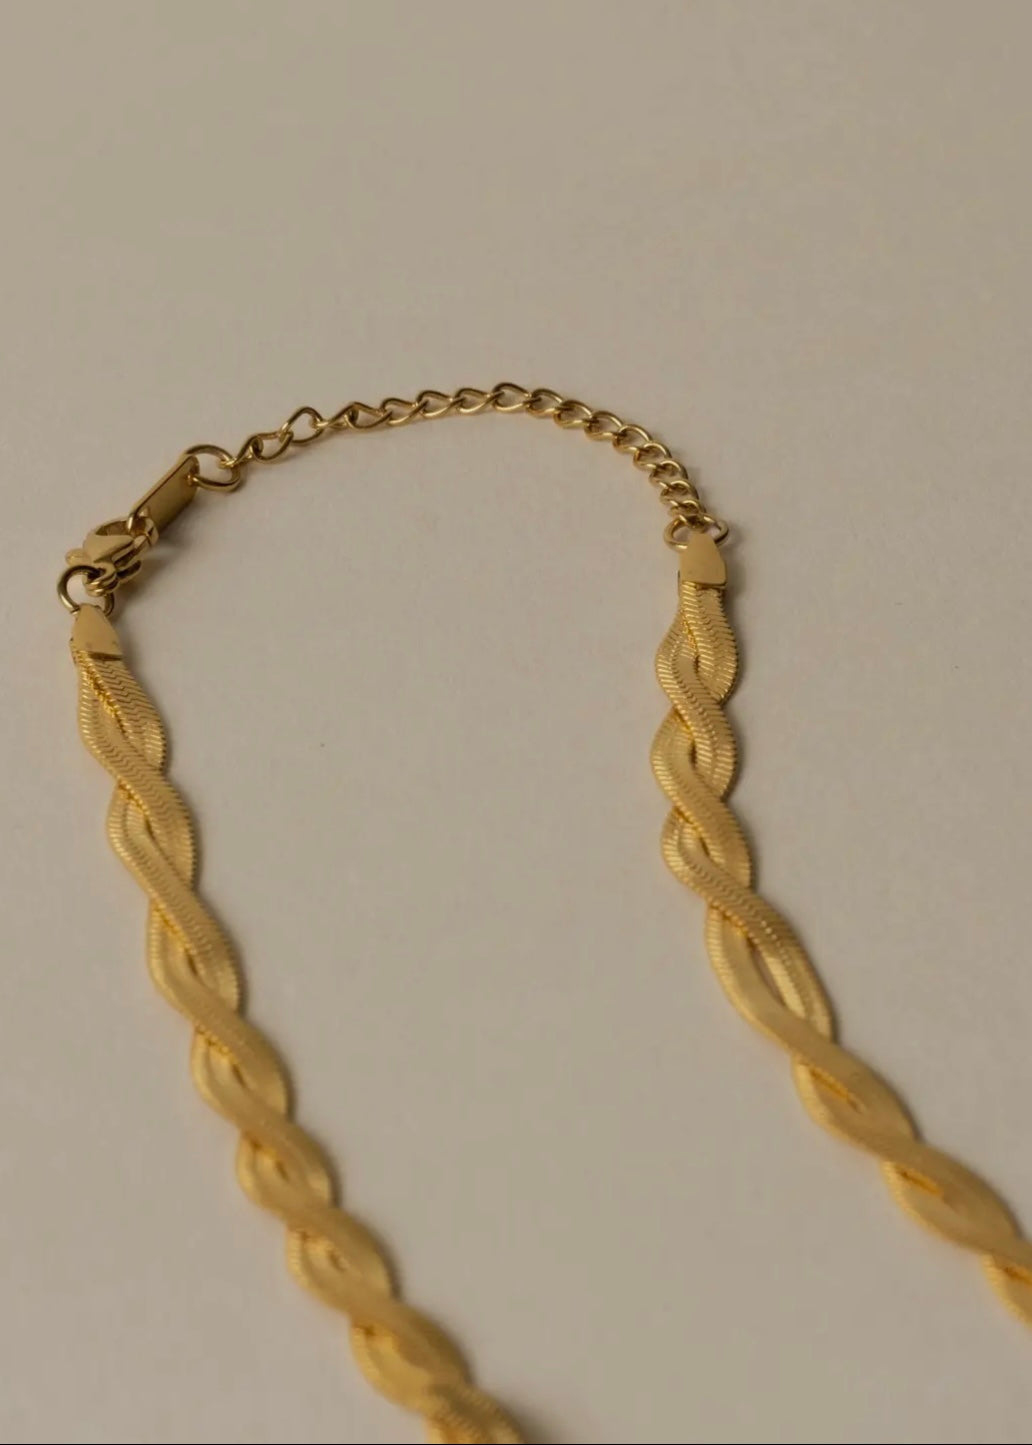 Double Braided Snake Chain